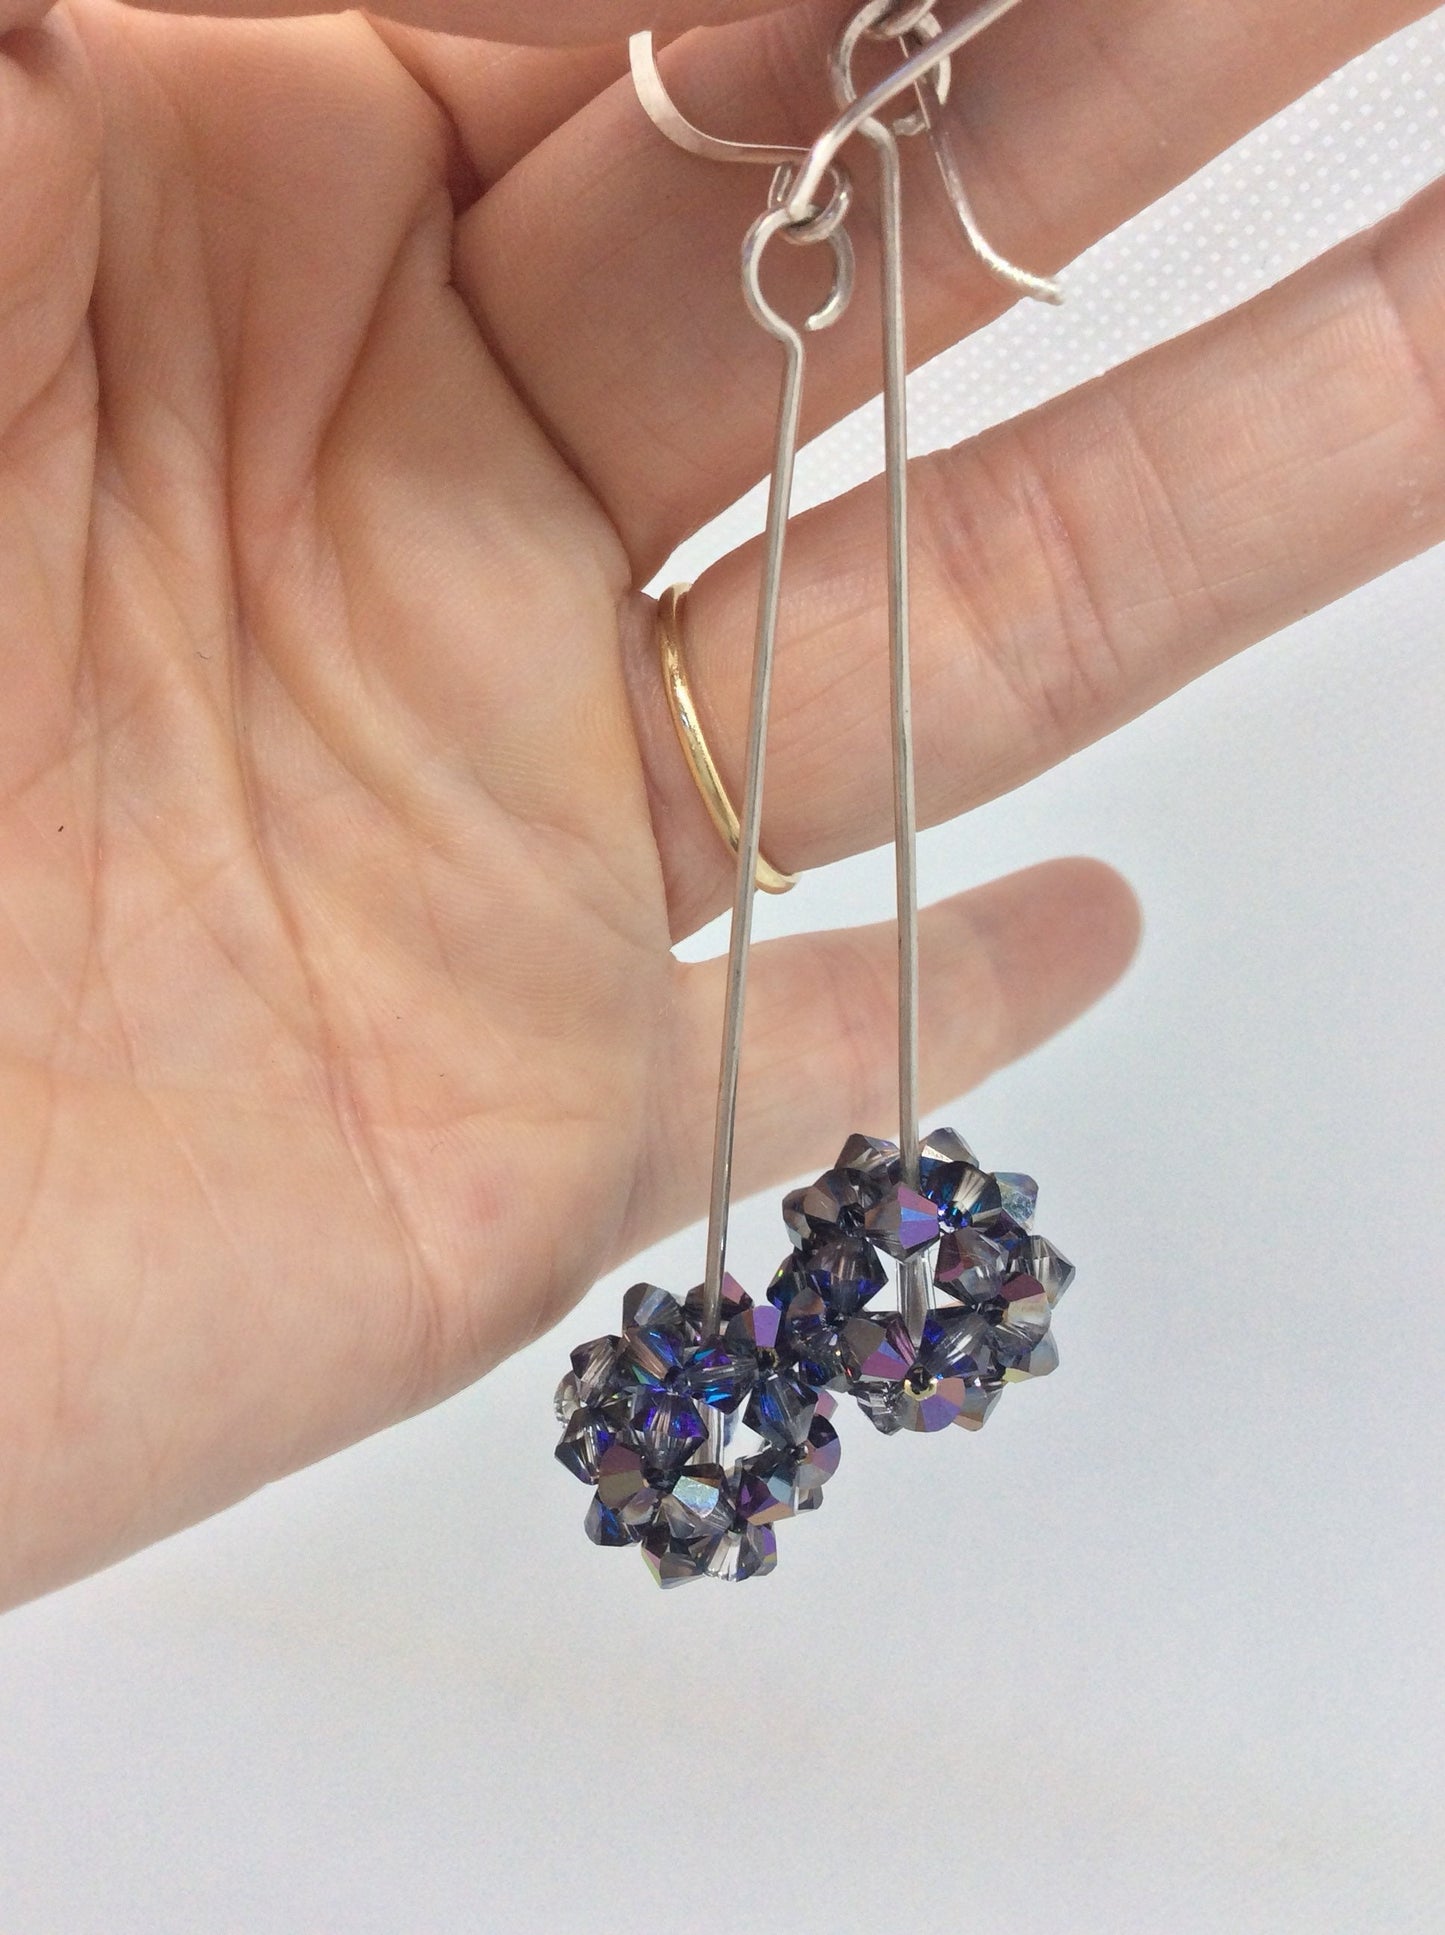 Sparkly crystal bead dangle earrings - Swarovski crystal jewelry for women - handwoven crystal beads - boho chic unique design